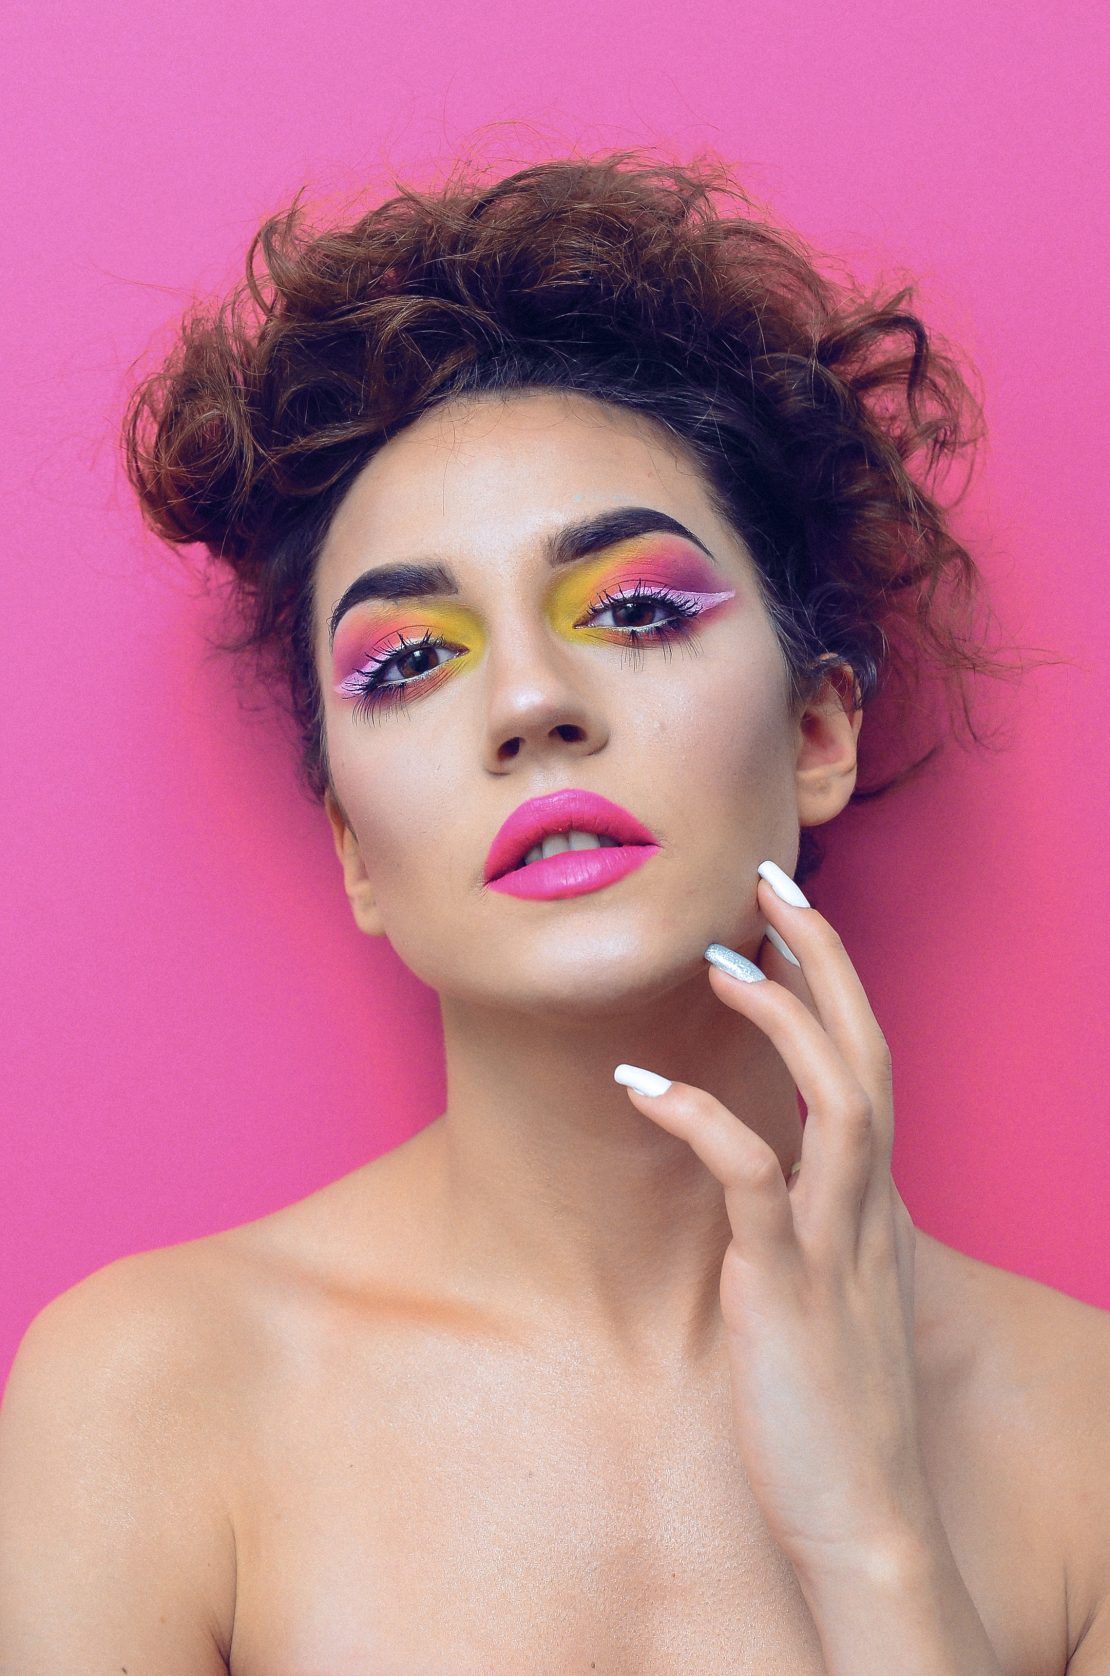 Do you need a license to become a makeup artist | Health and Style Institute | Contact us today at 1-844-94-STYLE for more information about our programs.